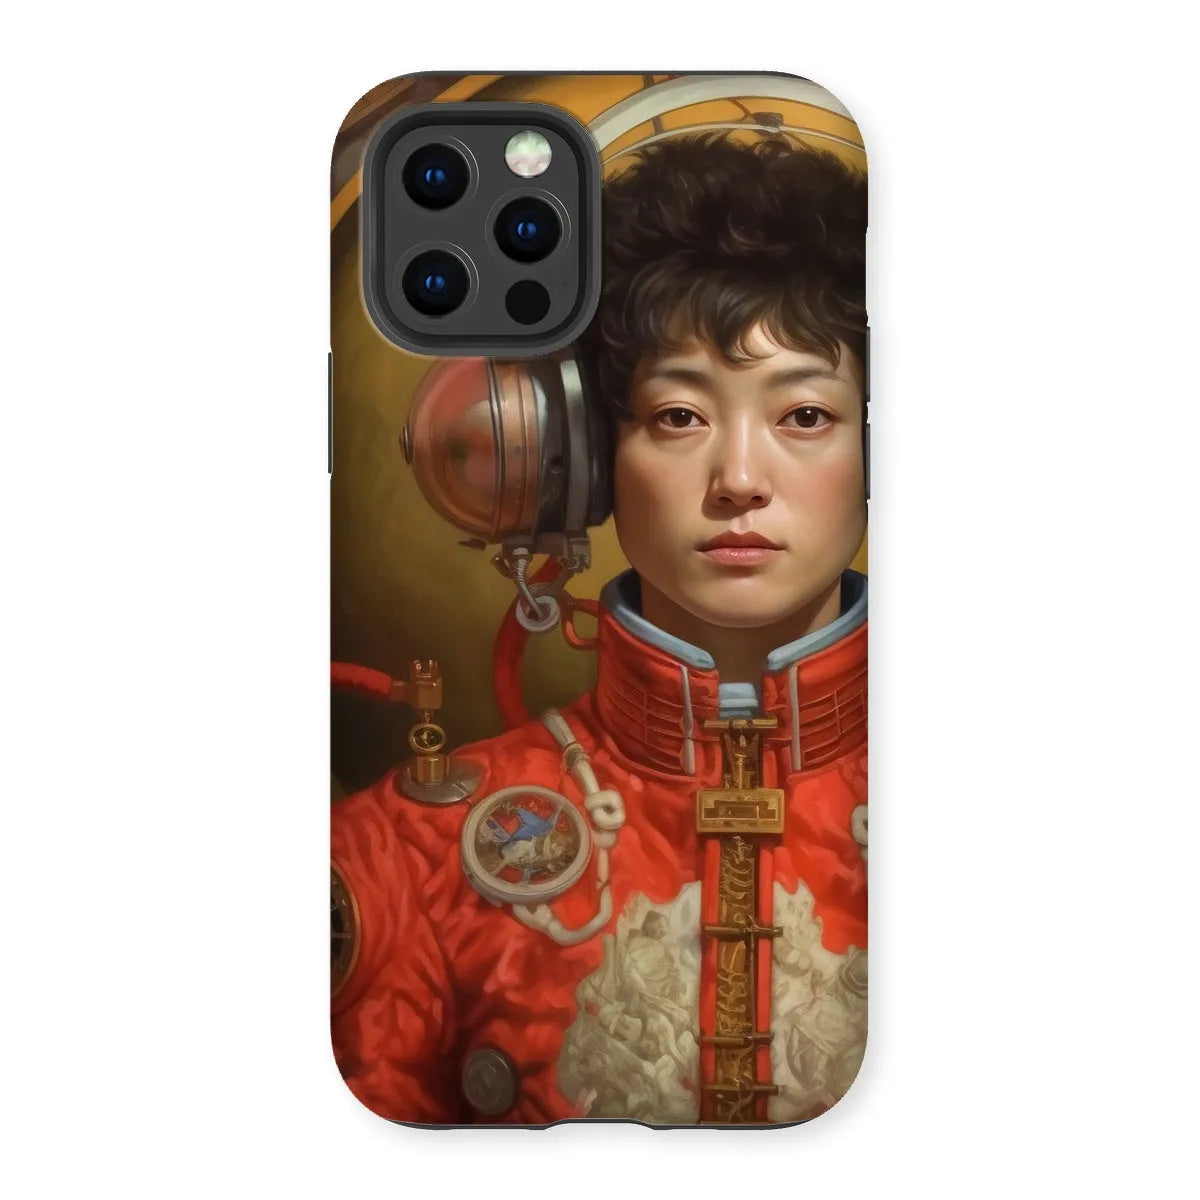 Mùchén - Gay Chinese Astronaut Aesthetic Phone Case - Iphone 12 Pro / Matte - Mobile Phone Cases - Aesthetic Art